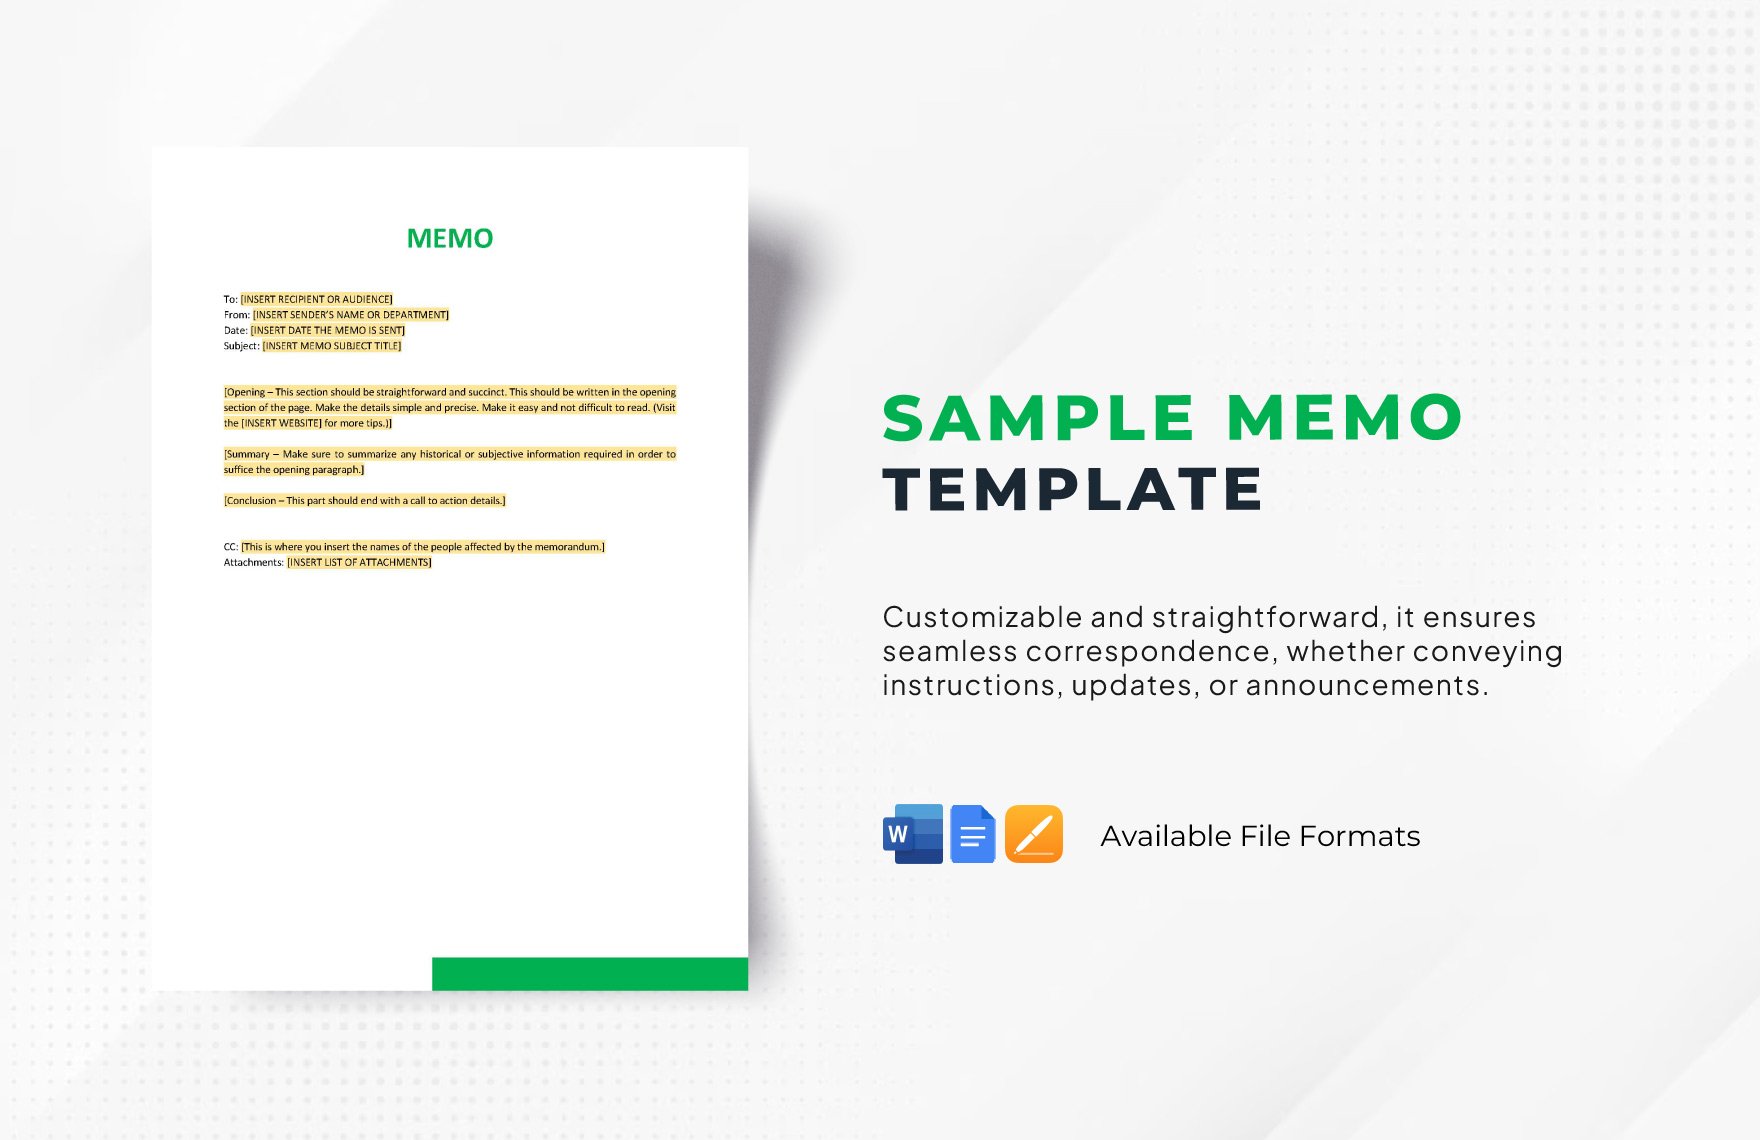 Sample Memo Template in Word, Google Docs, Apple Pages